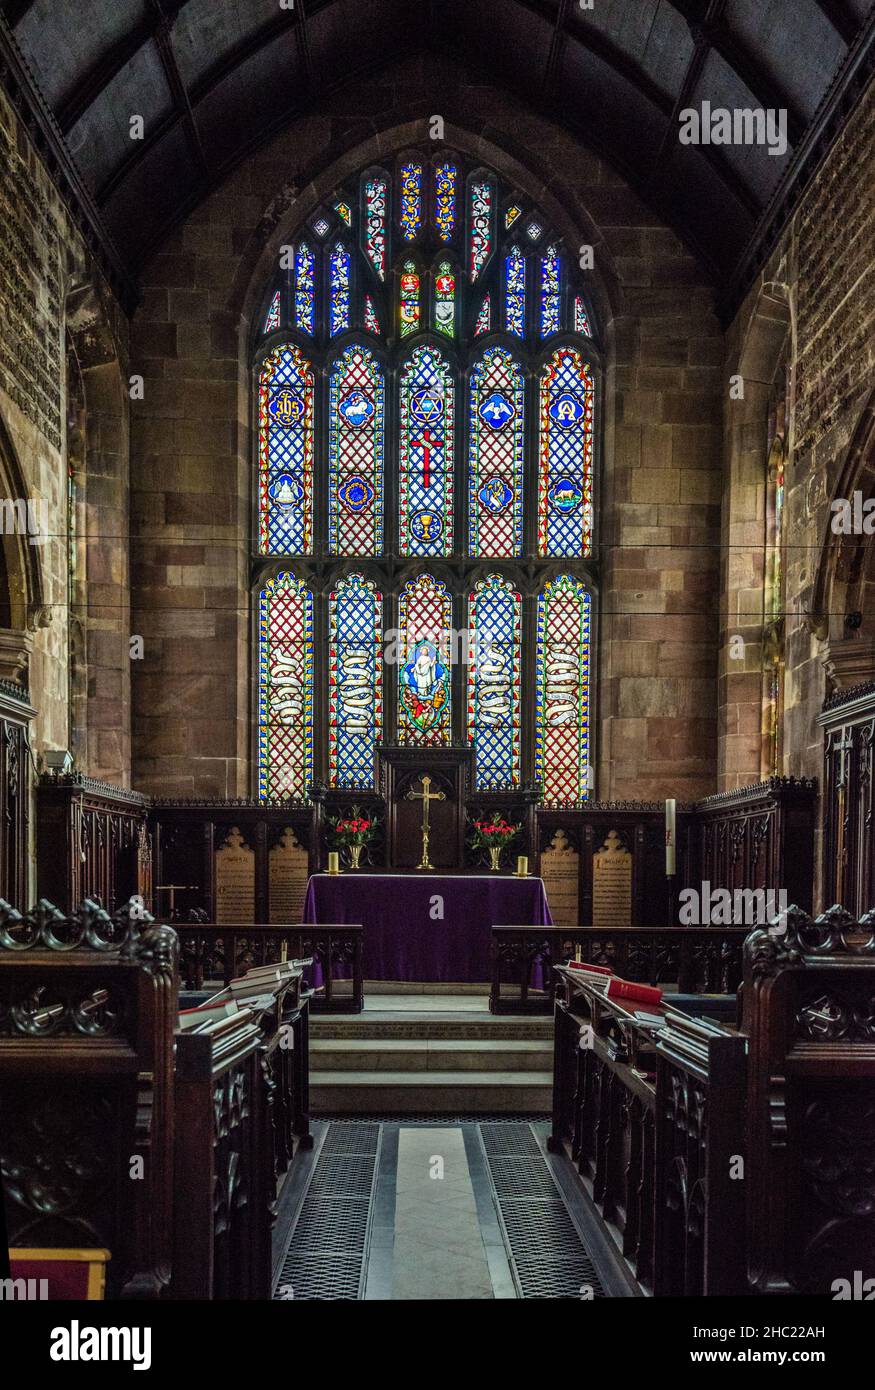 The beautiful stained glass above the altar at St Marys church, Sandbach,Cheshire Stock Photo